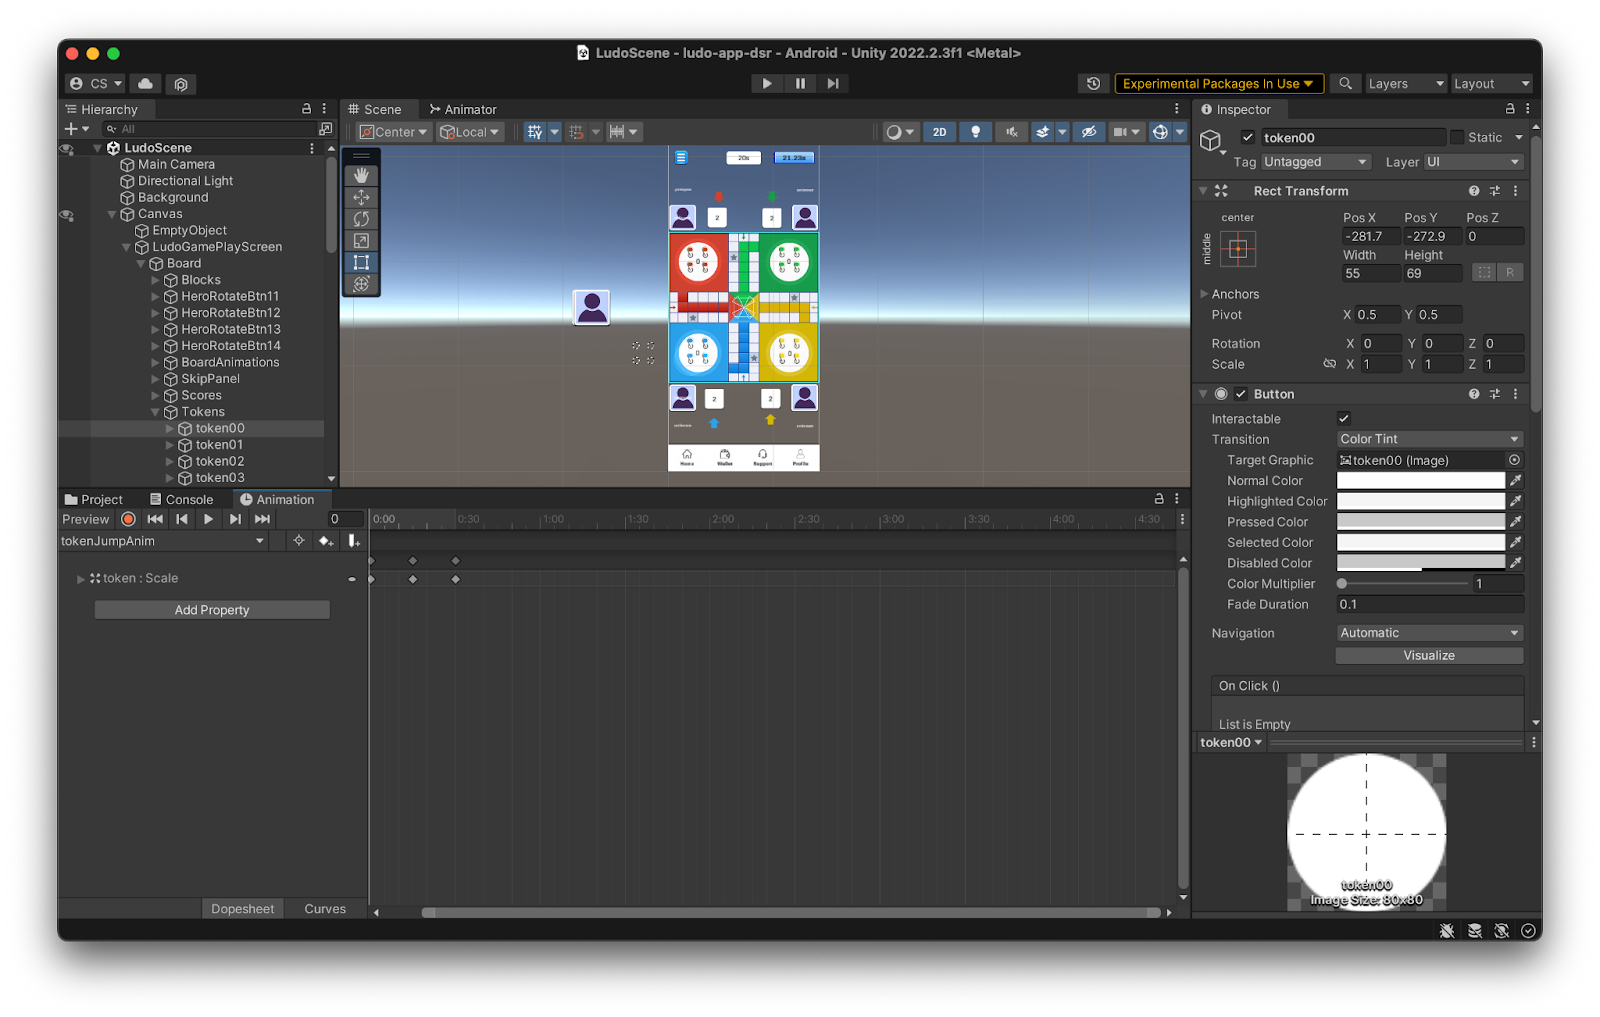 Familiarize yourself with the Unity Editor